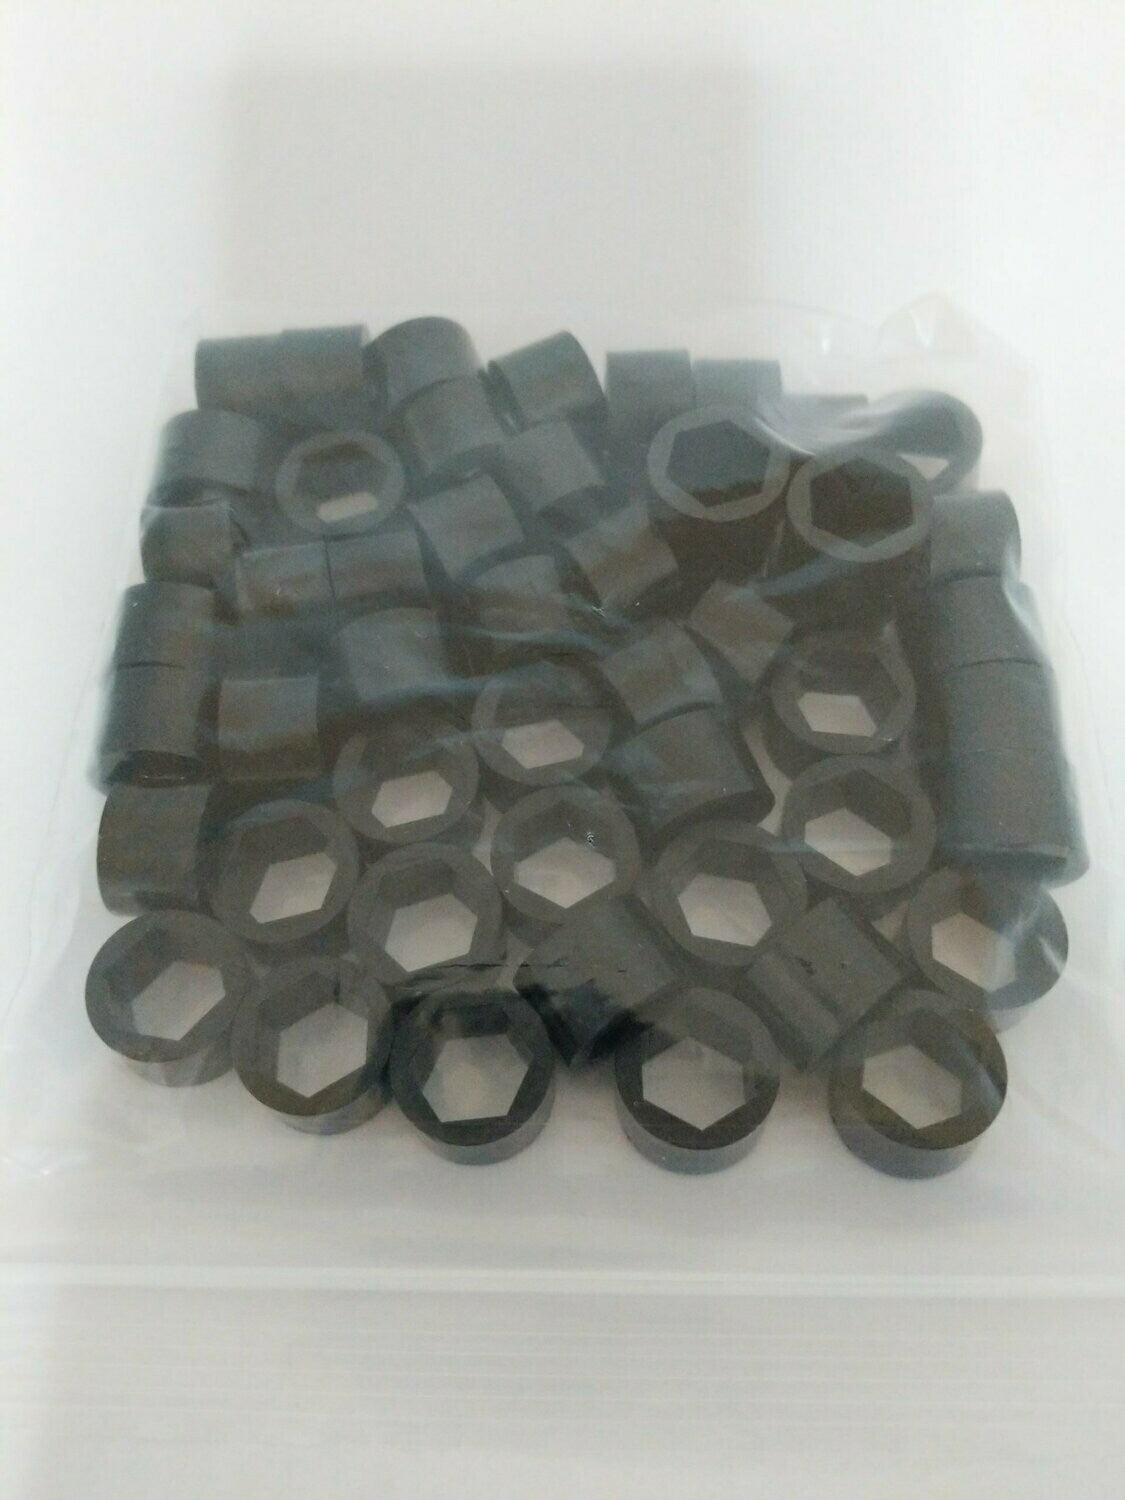 QTY 50 - Thrifty 1/2" Hex Spacers